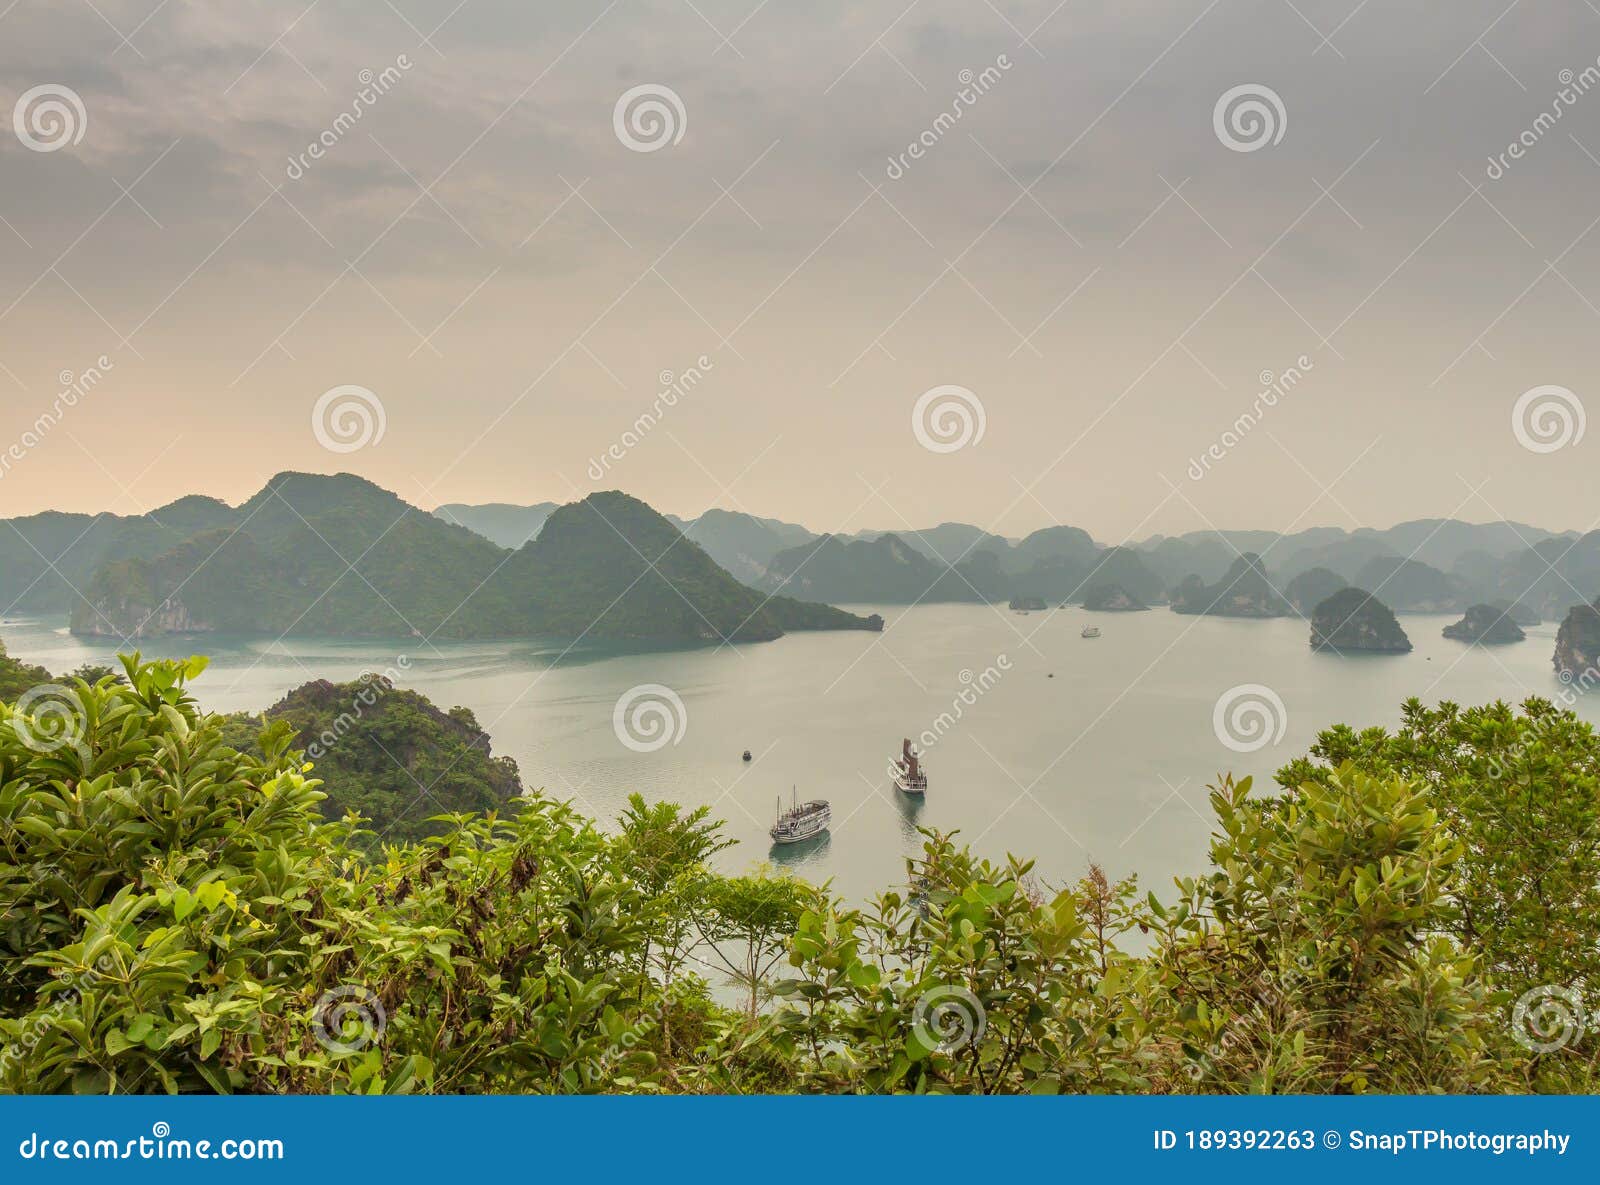 beautiful early morning view over the islands of ha long bay, vietnam